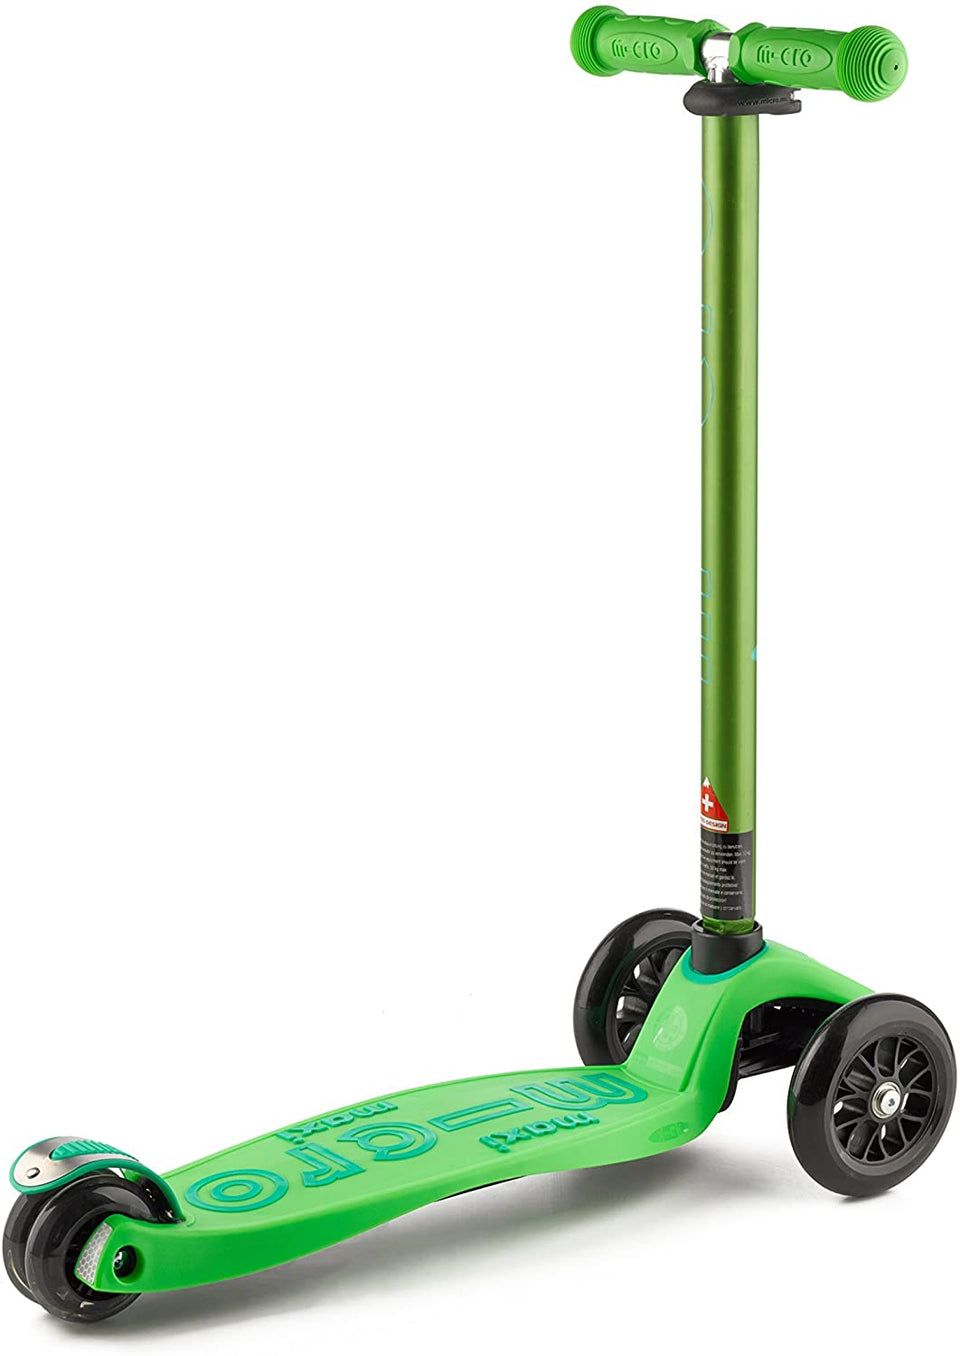 Maxi Micro Deluxe Green Scooter